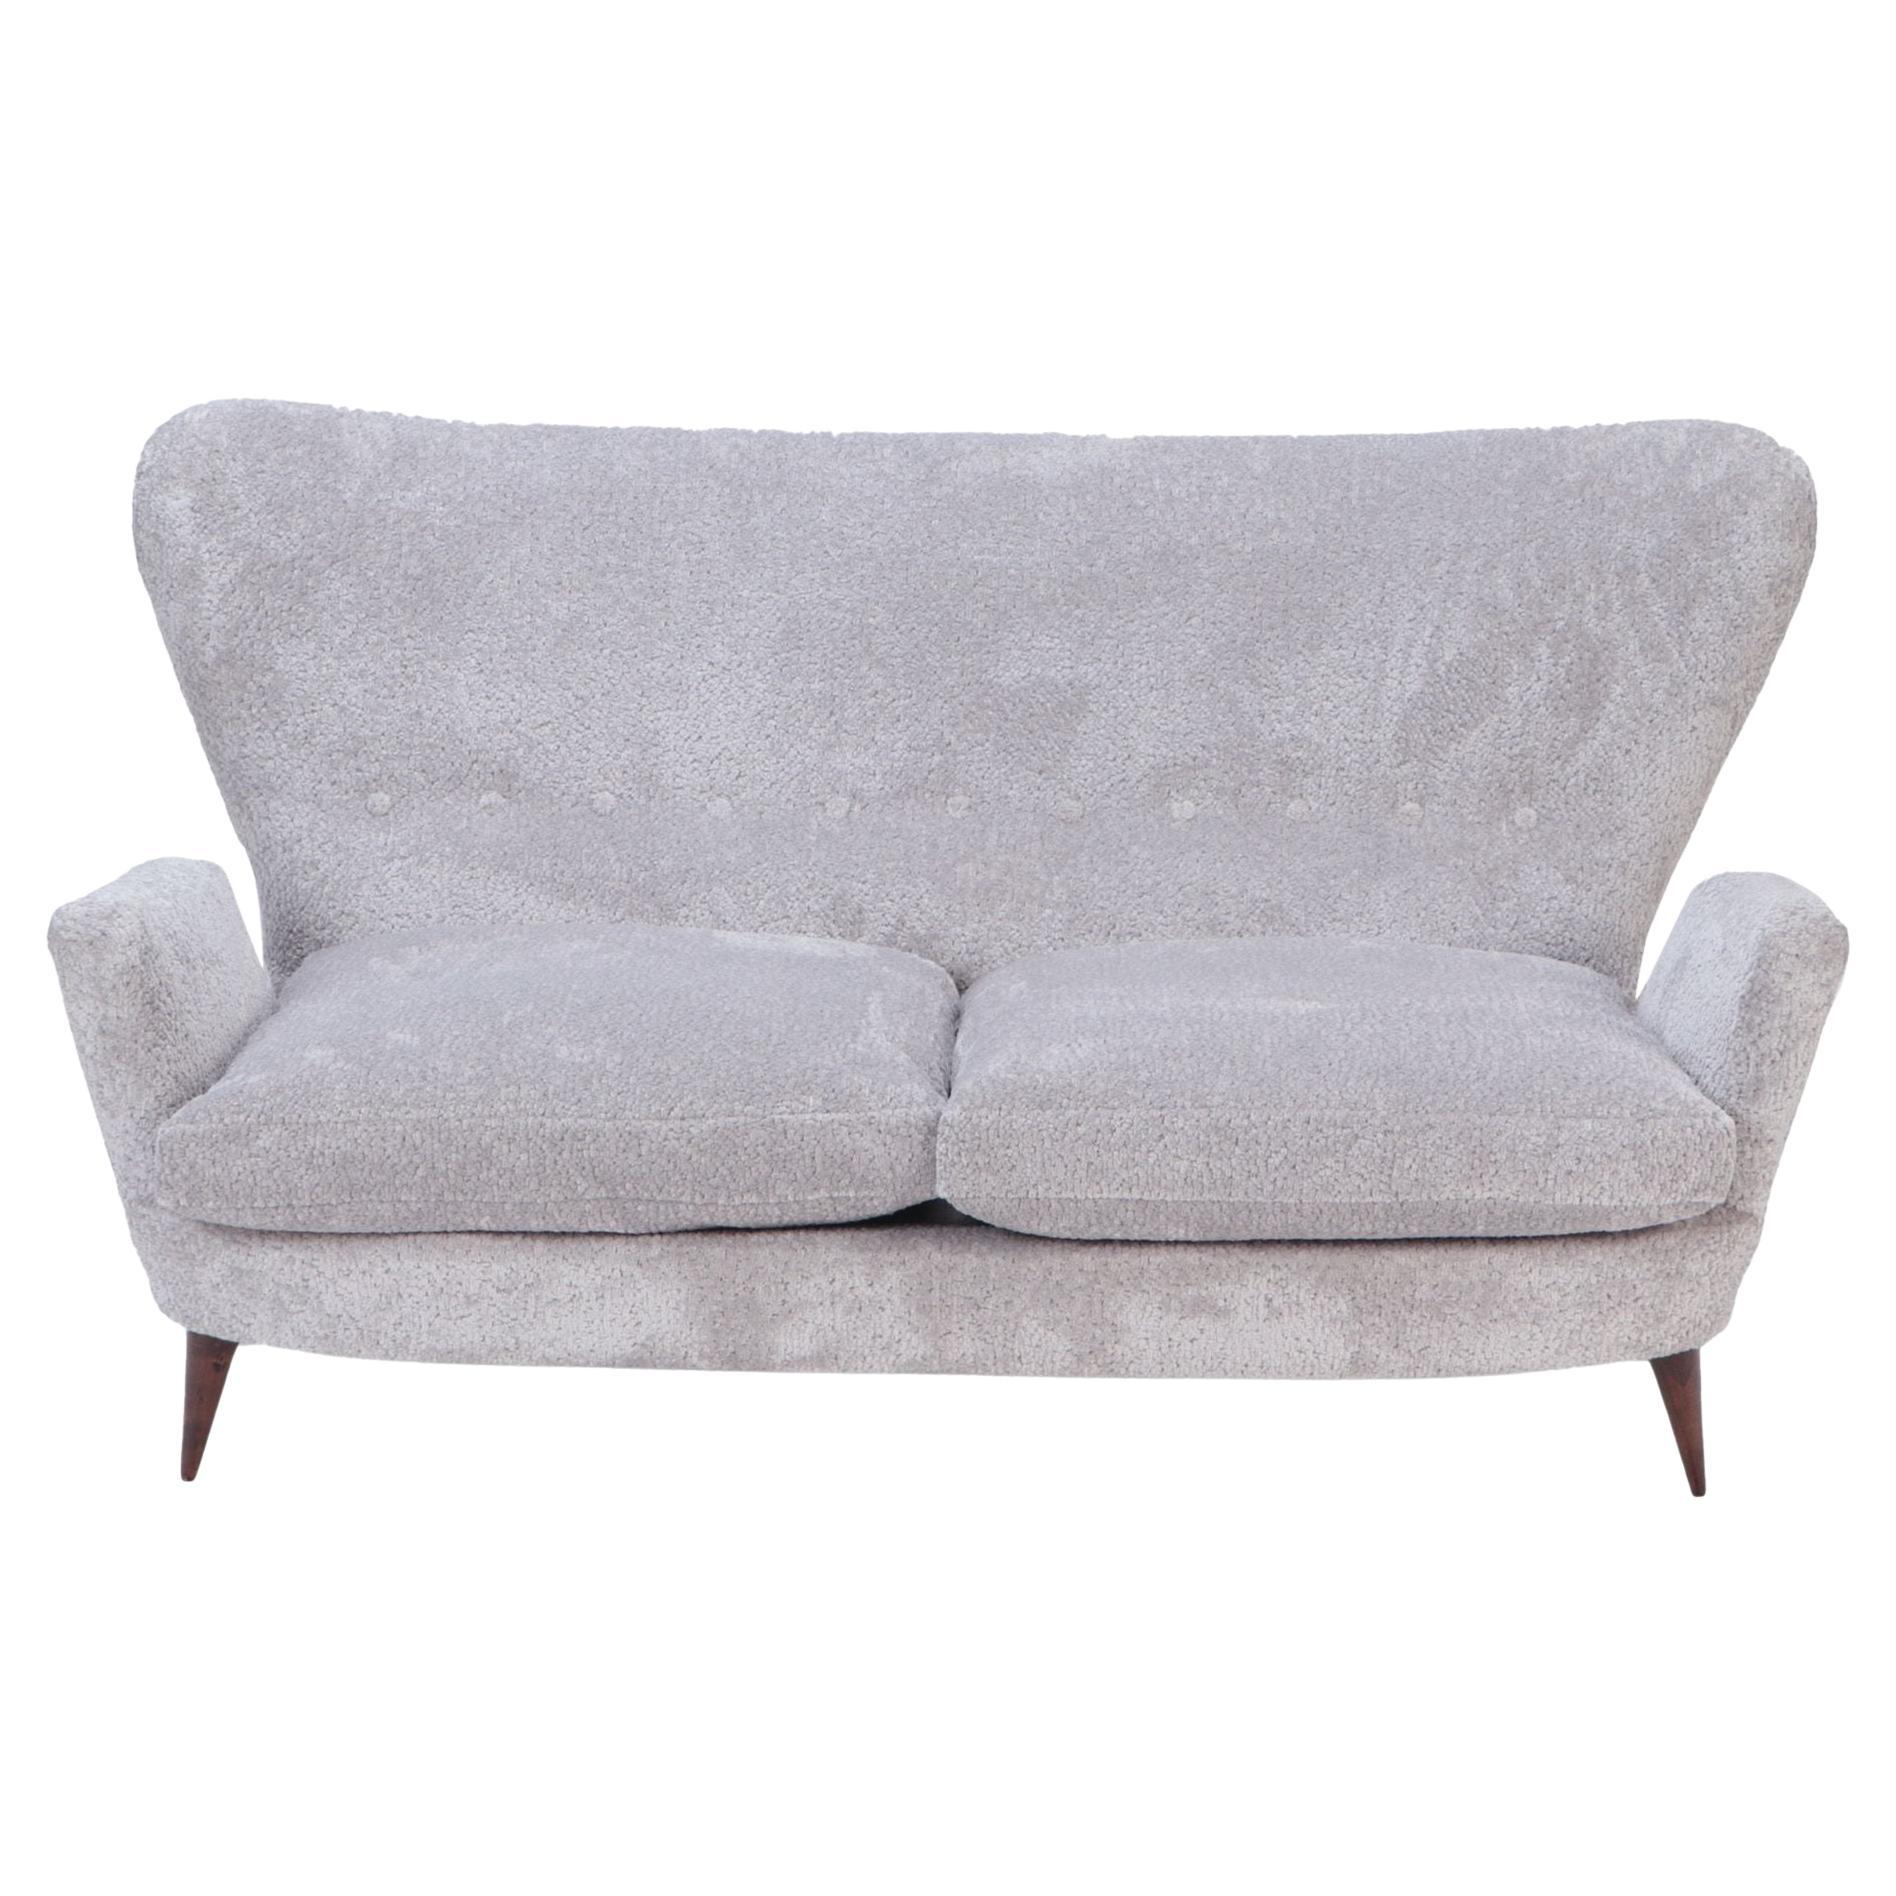 An Italian vintage wingback drop arm upholstered settee. For Sale